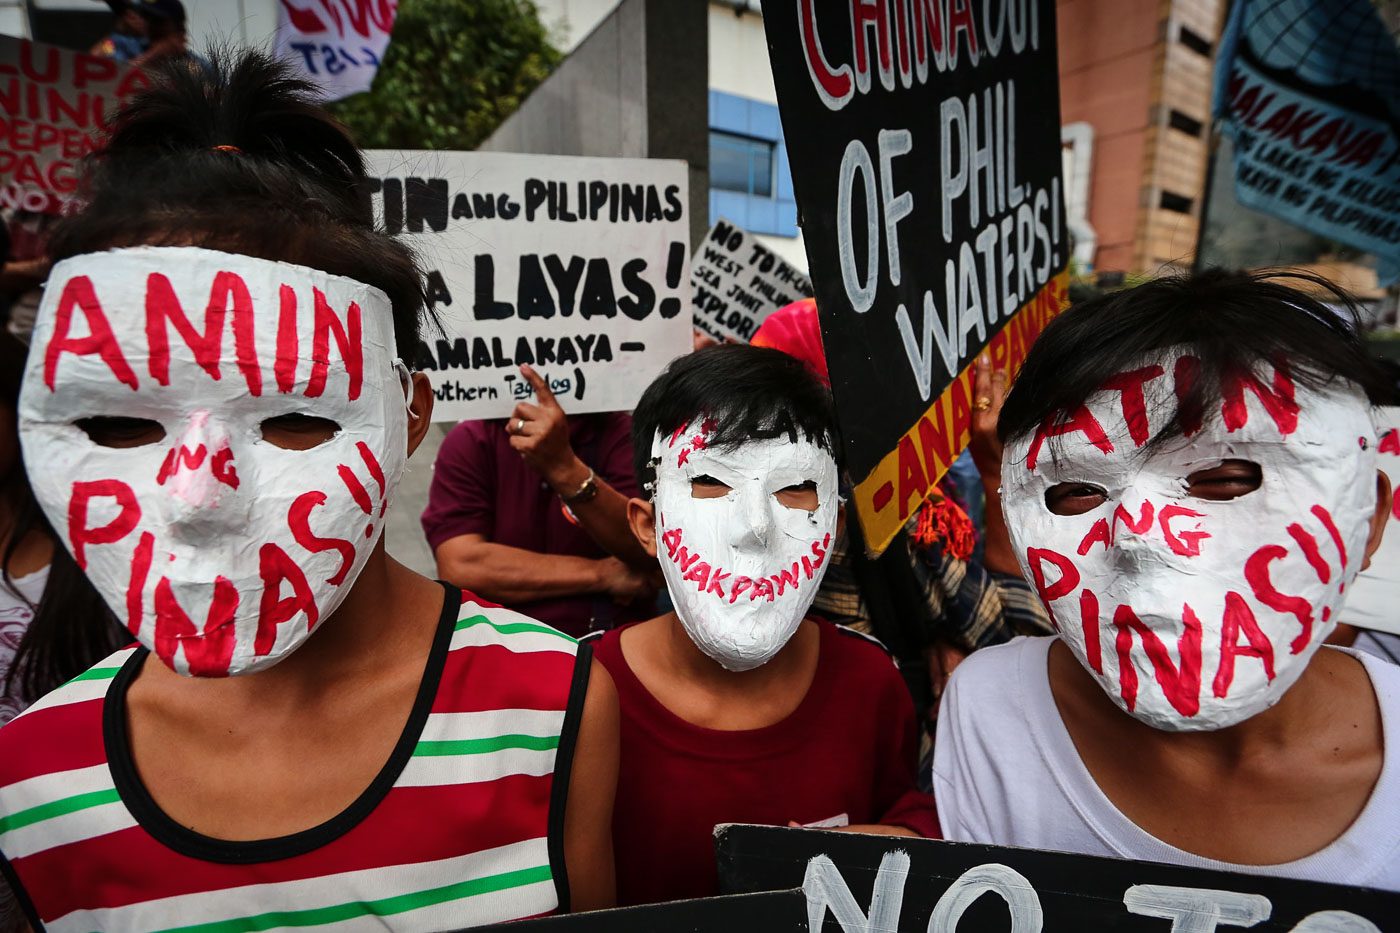 FOR THE PHILIPPINES. Men in masks make their own statement during a protest at the Chinese Consulate in light of Xi Jinping's PH state visit on November 20, 2018. Photo by Jire Carreon/Rappler 